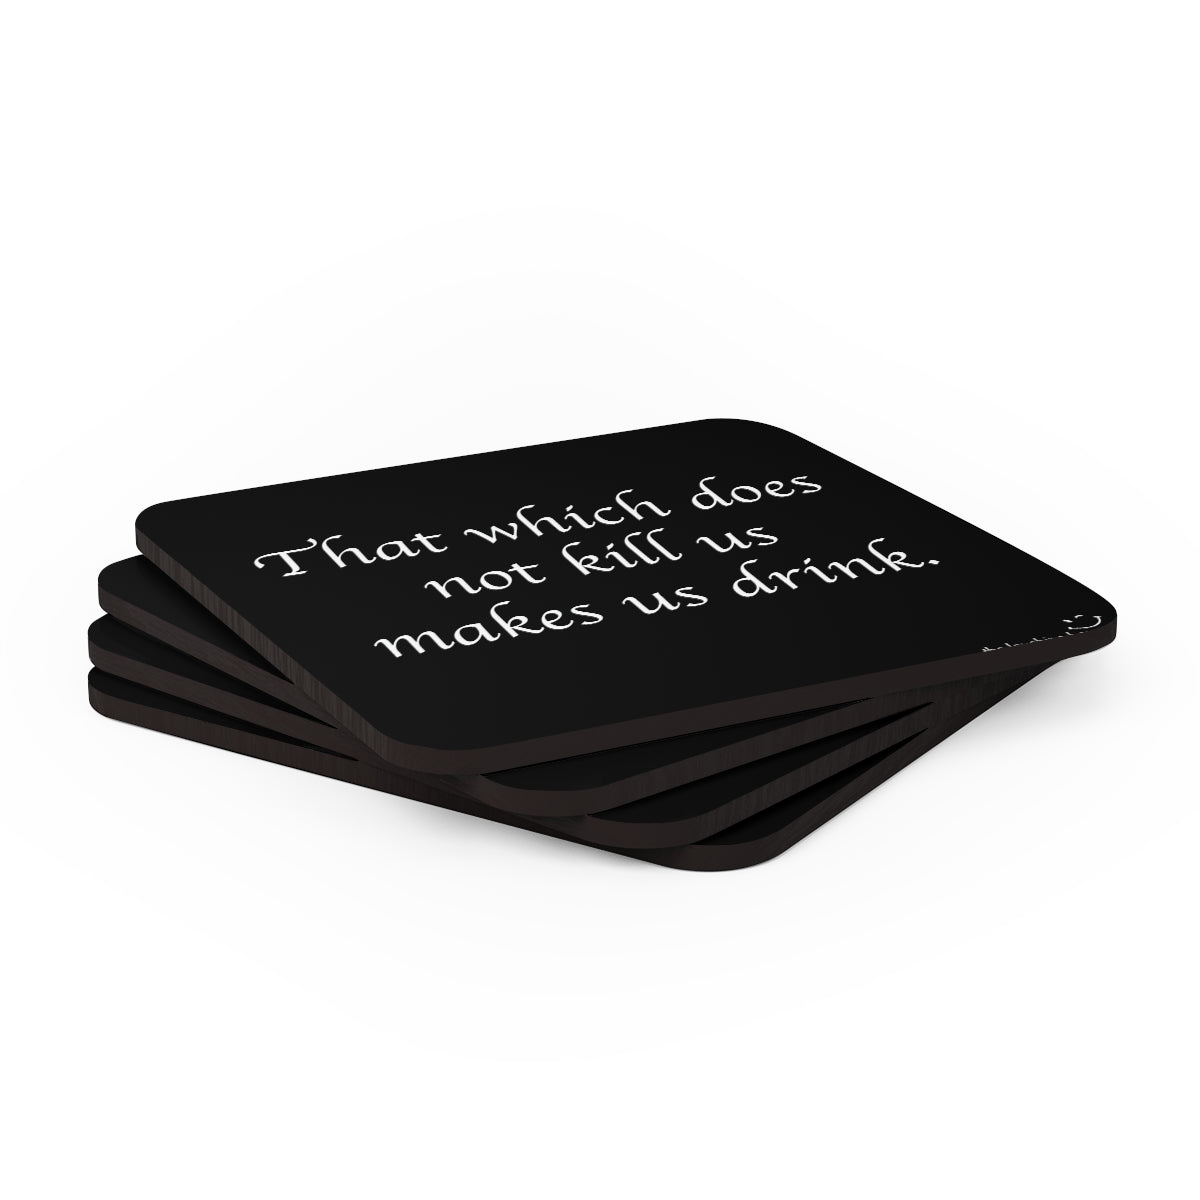 That which Does not Kill us Corkwood Coaster Set of 4